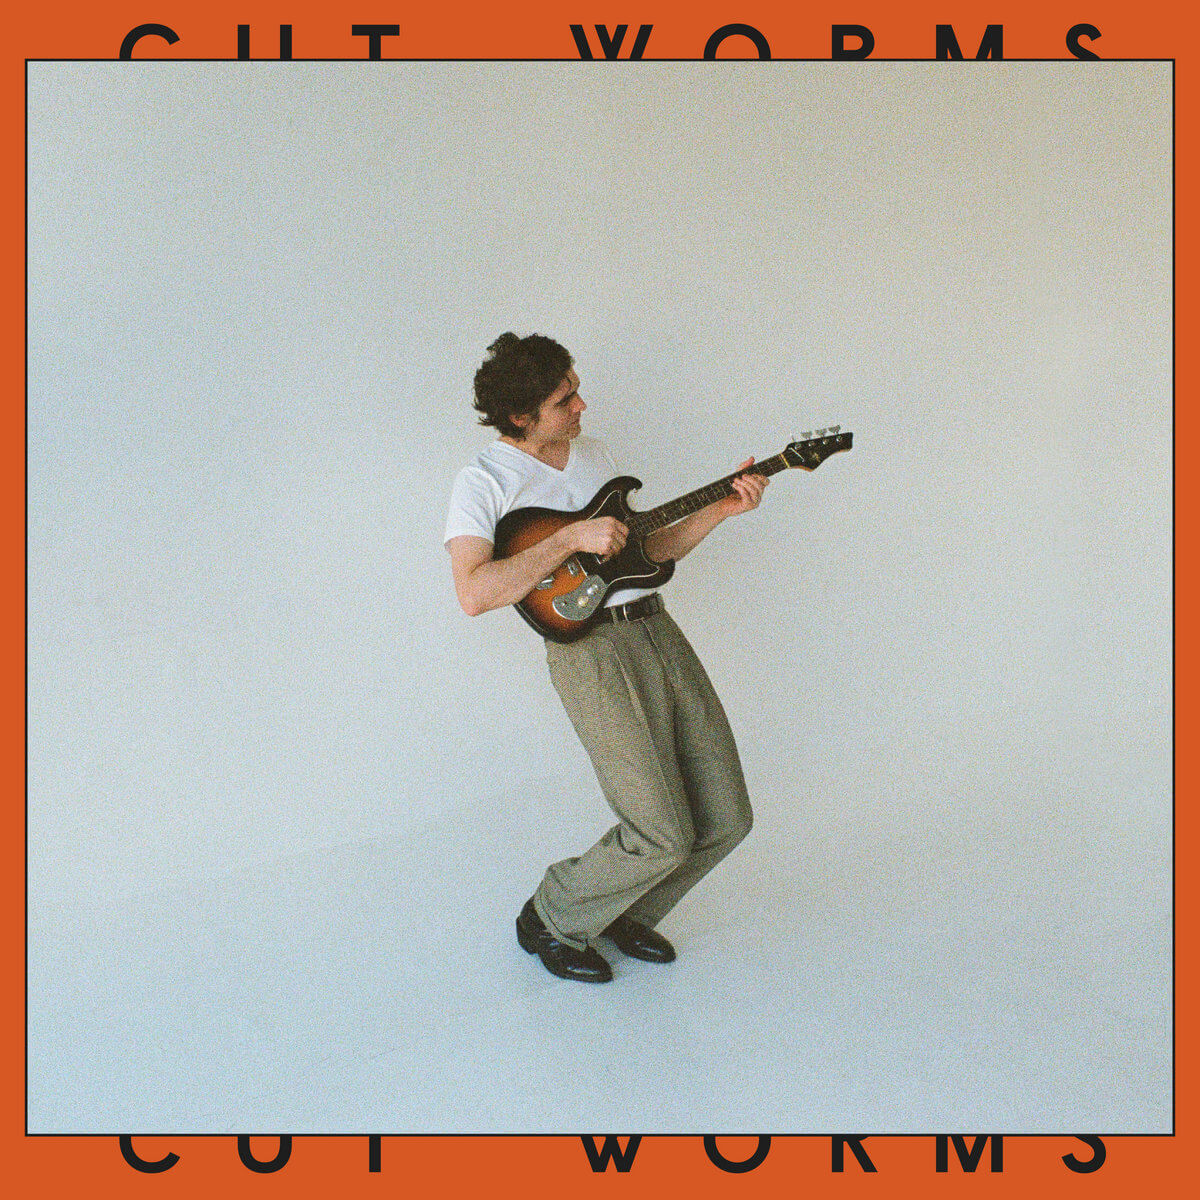 Cut Worms by Cut Worms album review by Sam Eeckhout. The band's self-titled release drops on July 21st via Jagjaguwar and DSPs